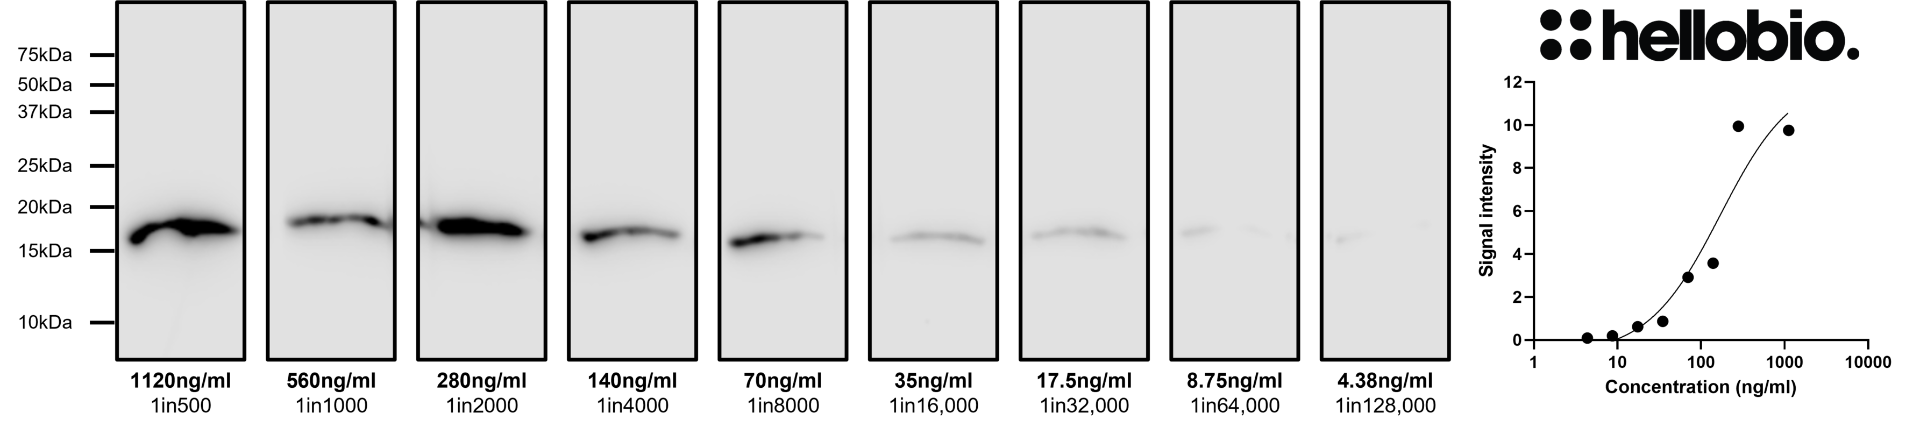 Figure 2. Concentration response of HB6980 staining in a rat brain cytosol preparation.